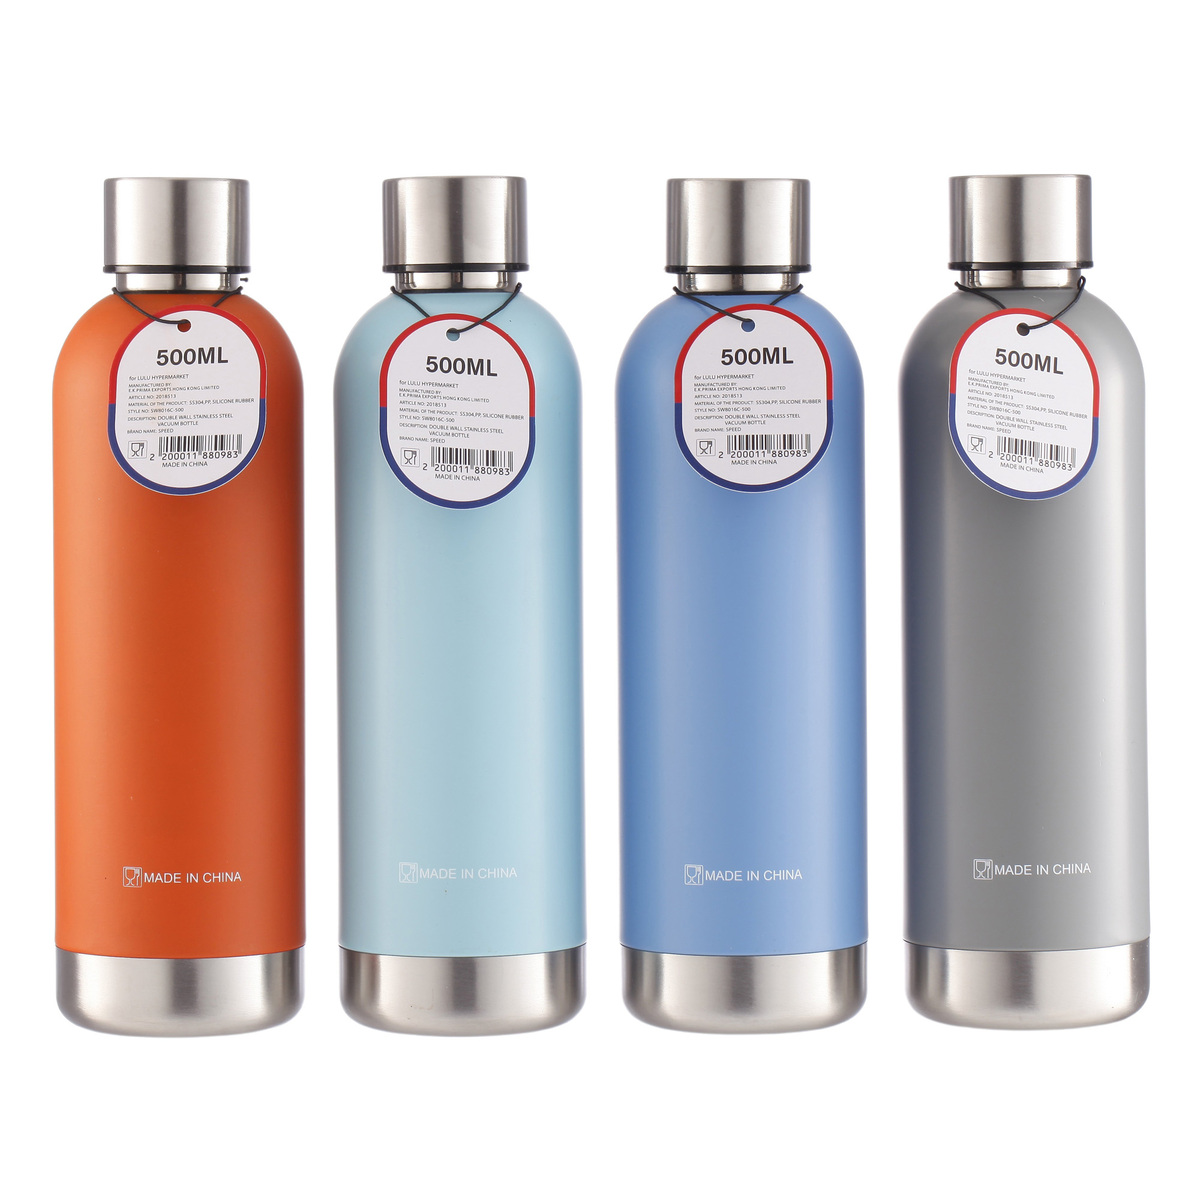 Speed Double Wall Stainless Steel Vacuum Bottle, 500 ml, Assorted Colors, 8016C